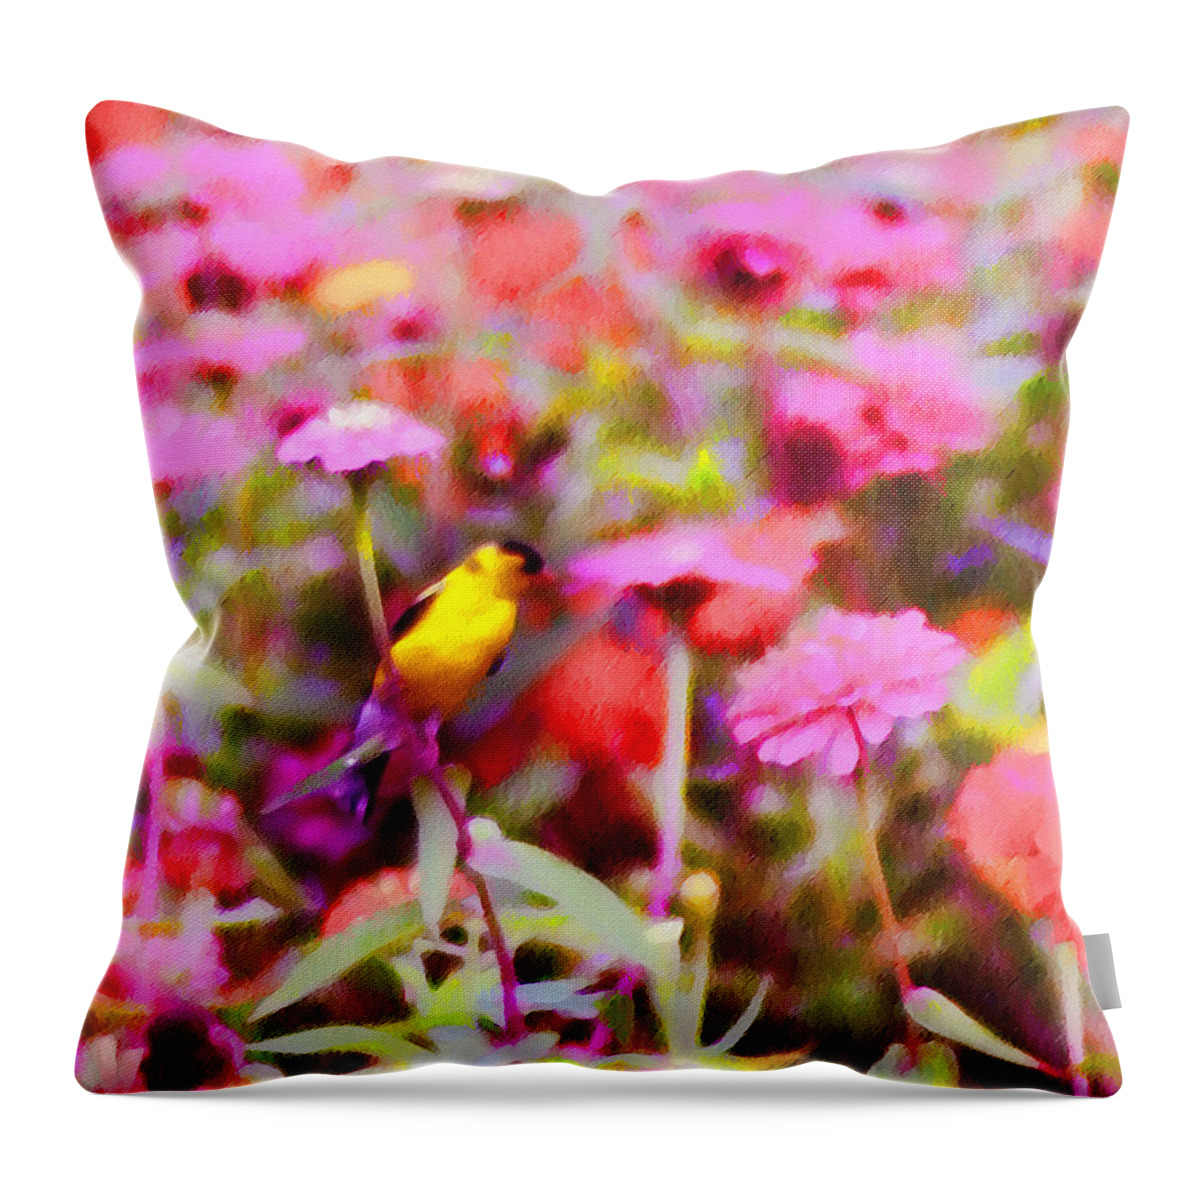 Little Birdie In The Spring Throw Pillow featuring the photograph Little Birdie in the Spring by Bill Cannon